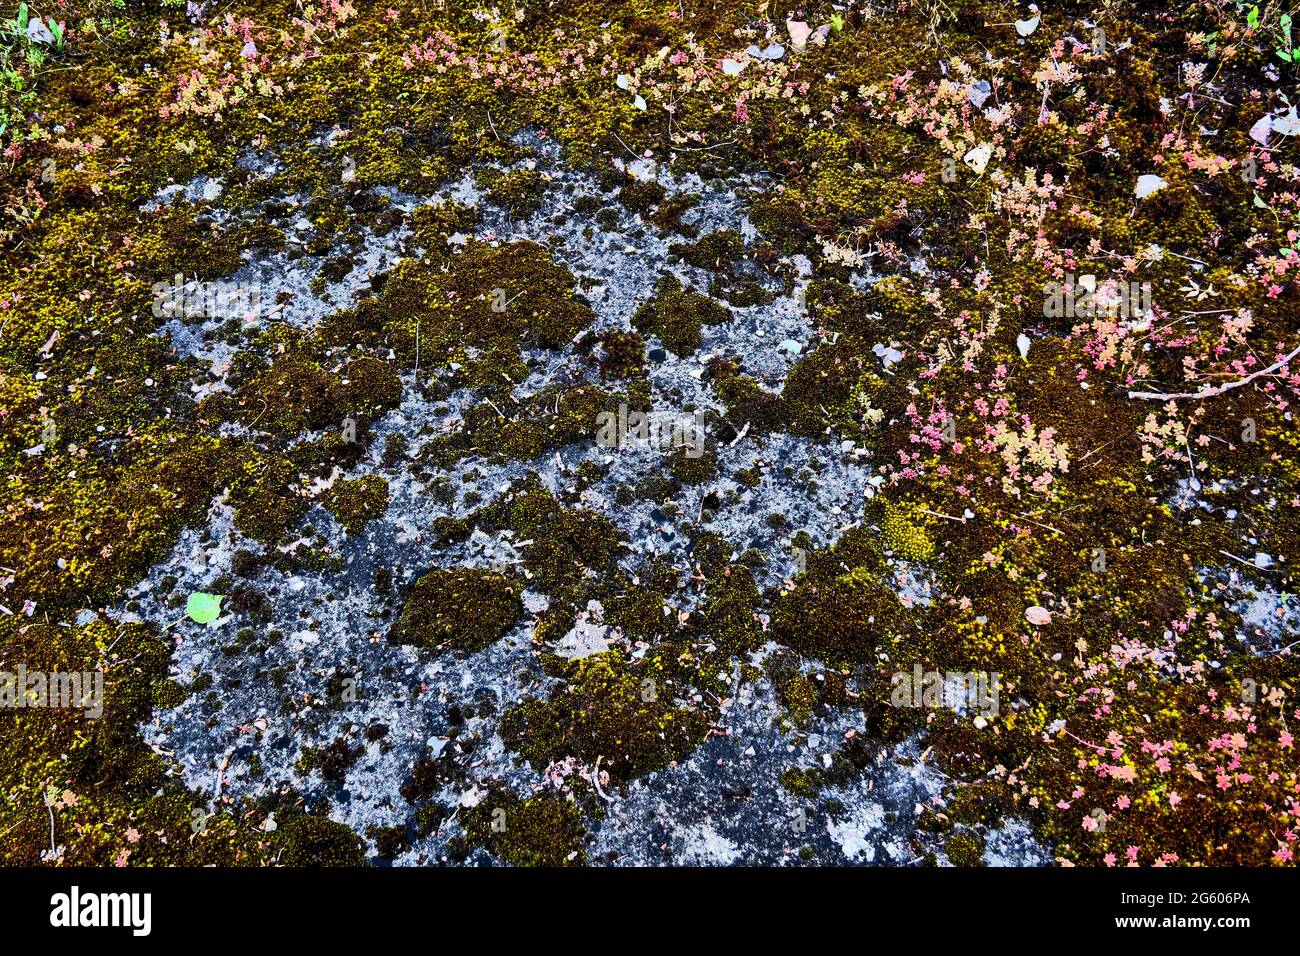 Concrete slab covered with mousses and lichens, conceptual photography, France Stock Photo